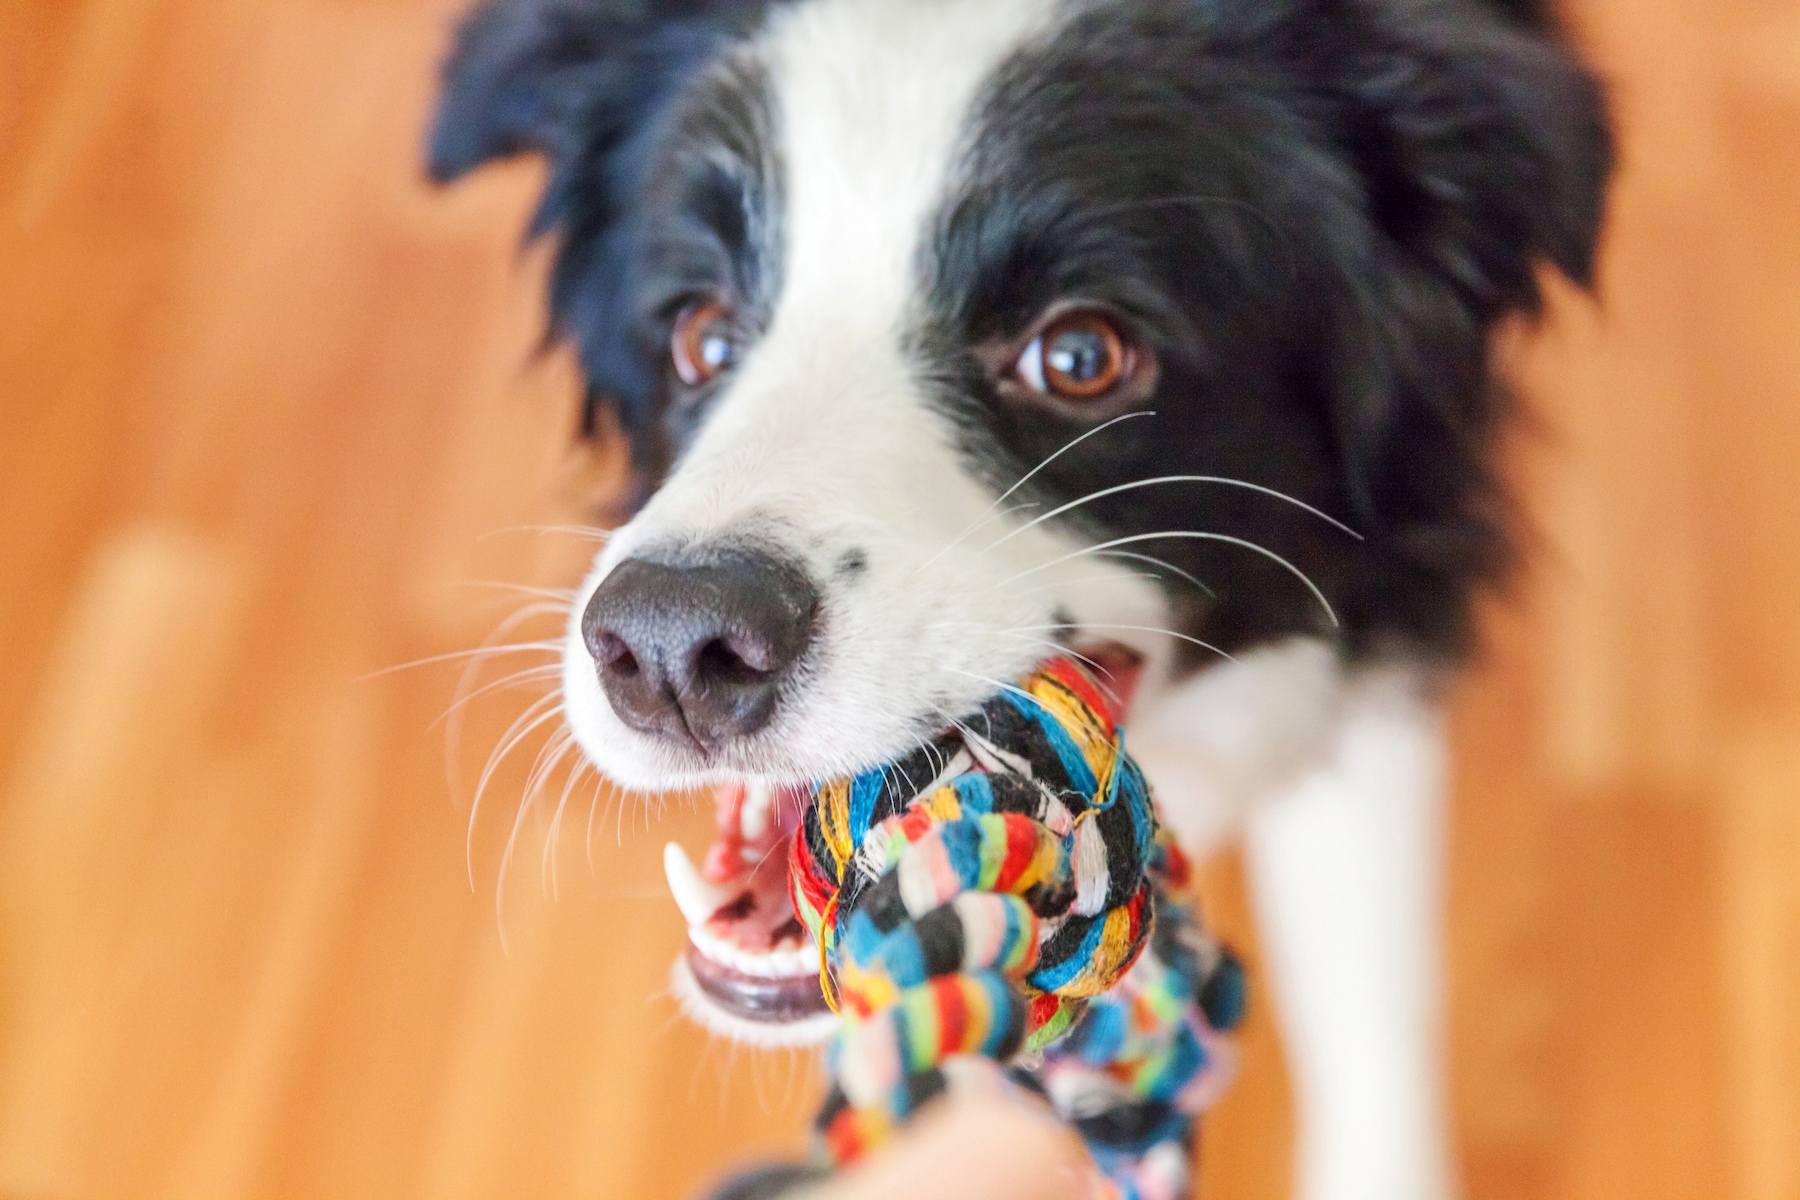 5 Easy to Make DIY Dog Toys [No Sew, Recycled materials] – DFW Craft Shows